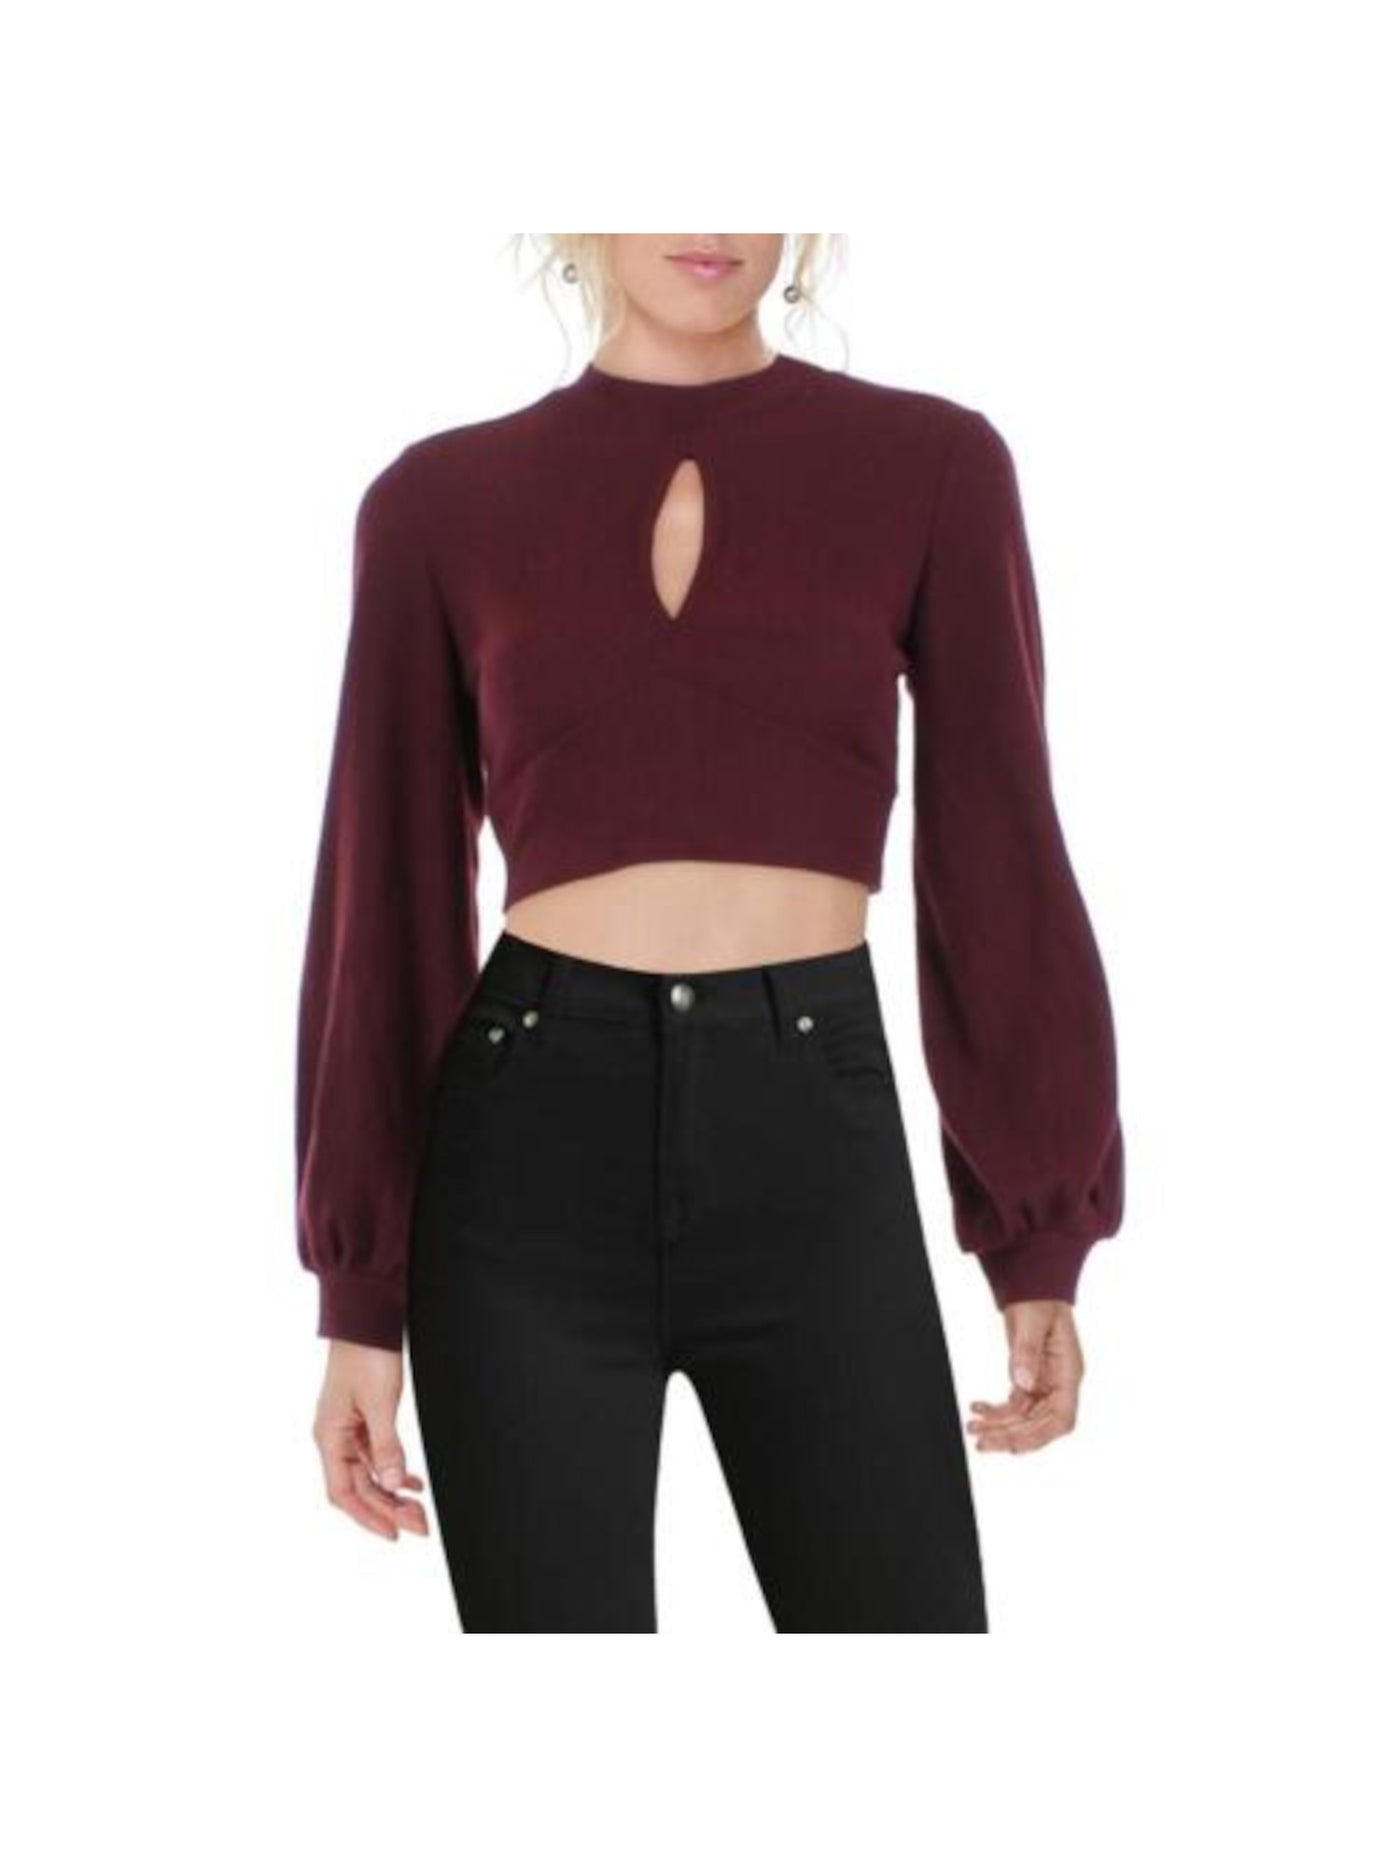 ALMOST FAMOUS Womens Maroon Cut Out Ribbed Button Neck Open Tie Back Balloon Sleeve Mock Neck Crop Top Sweater Juniors M